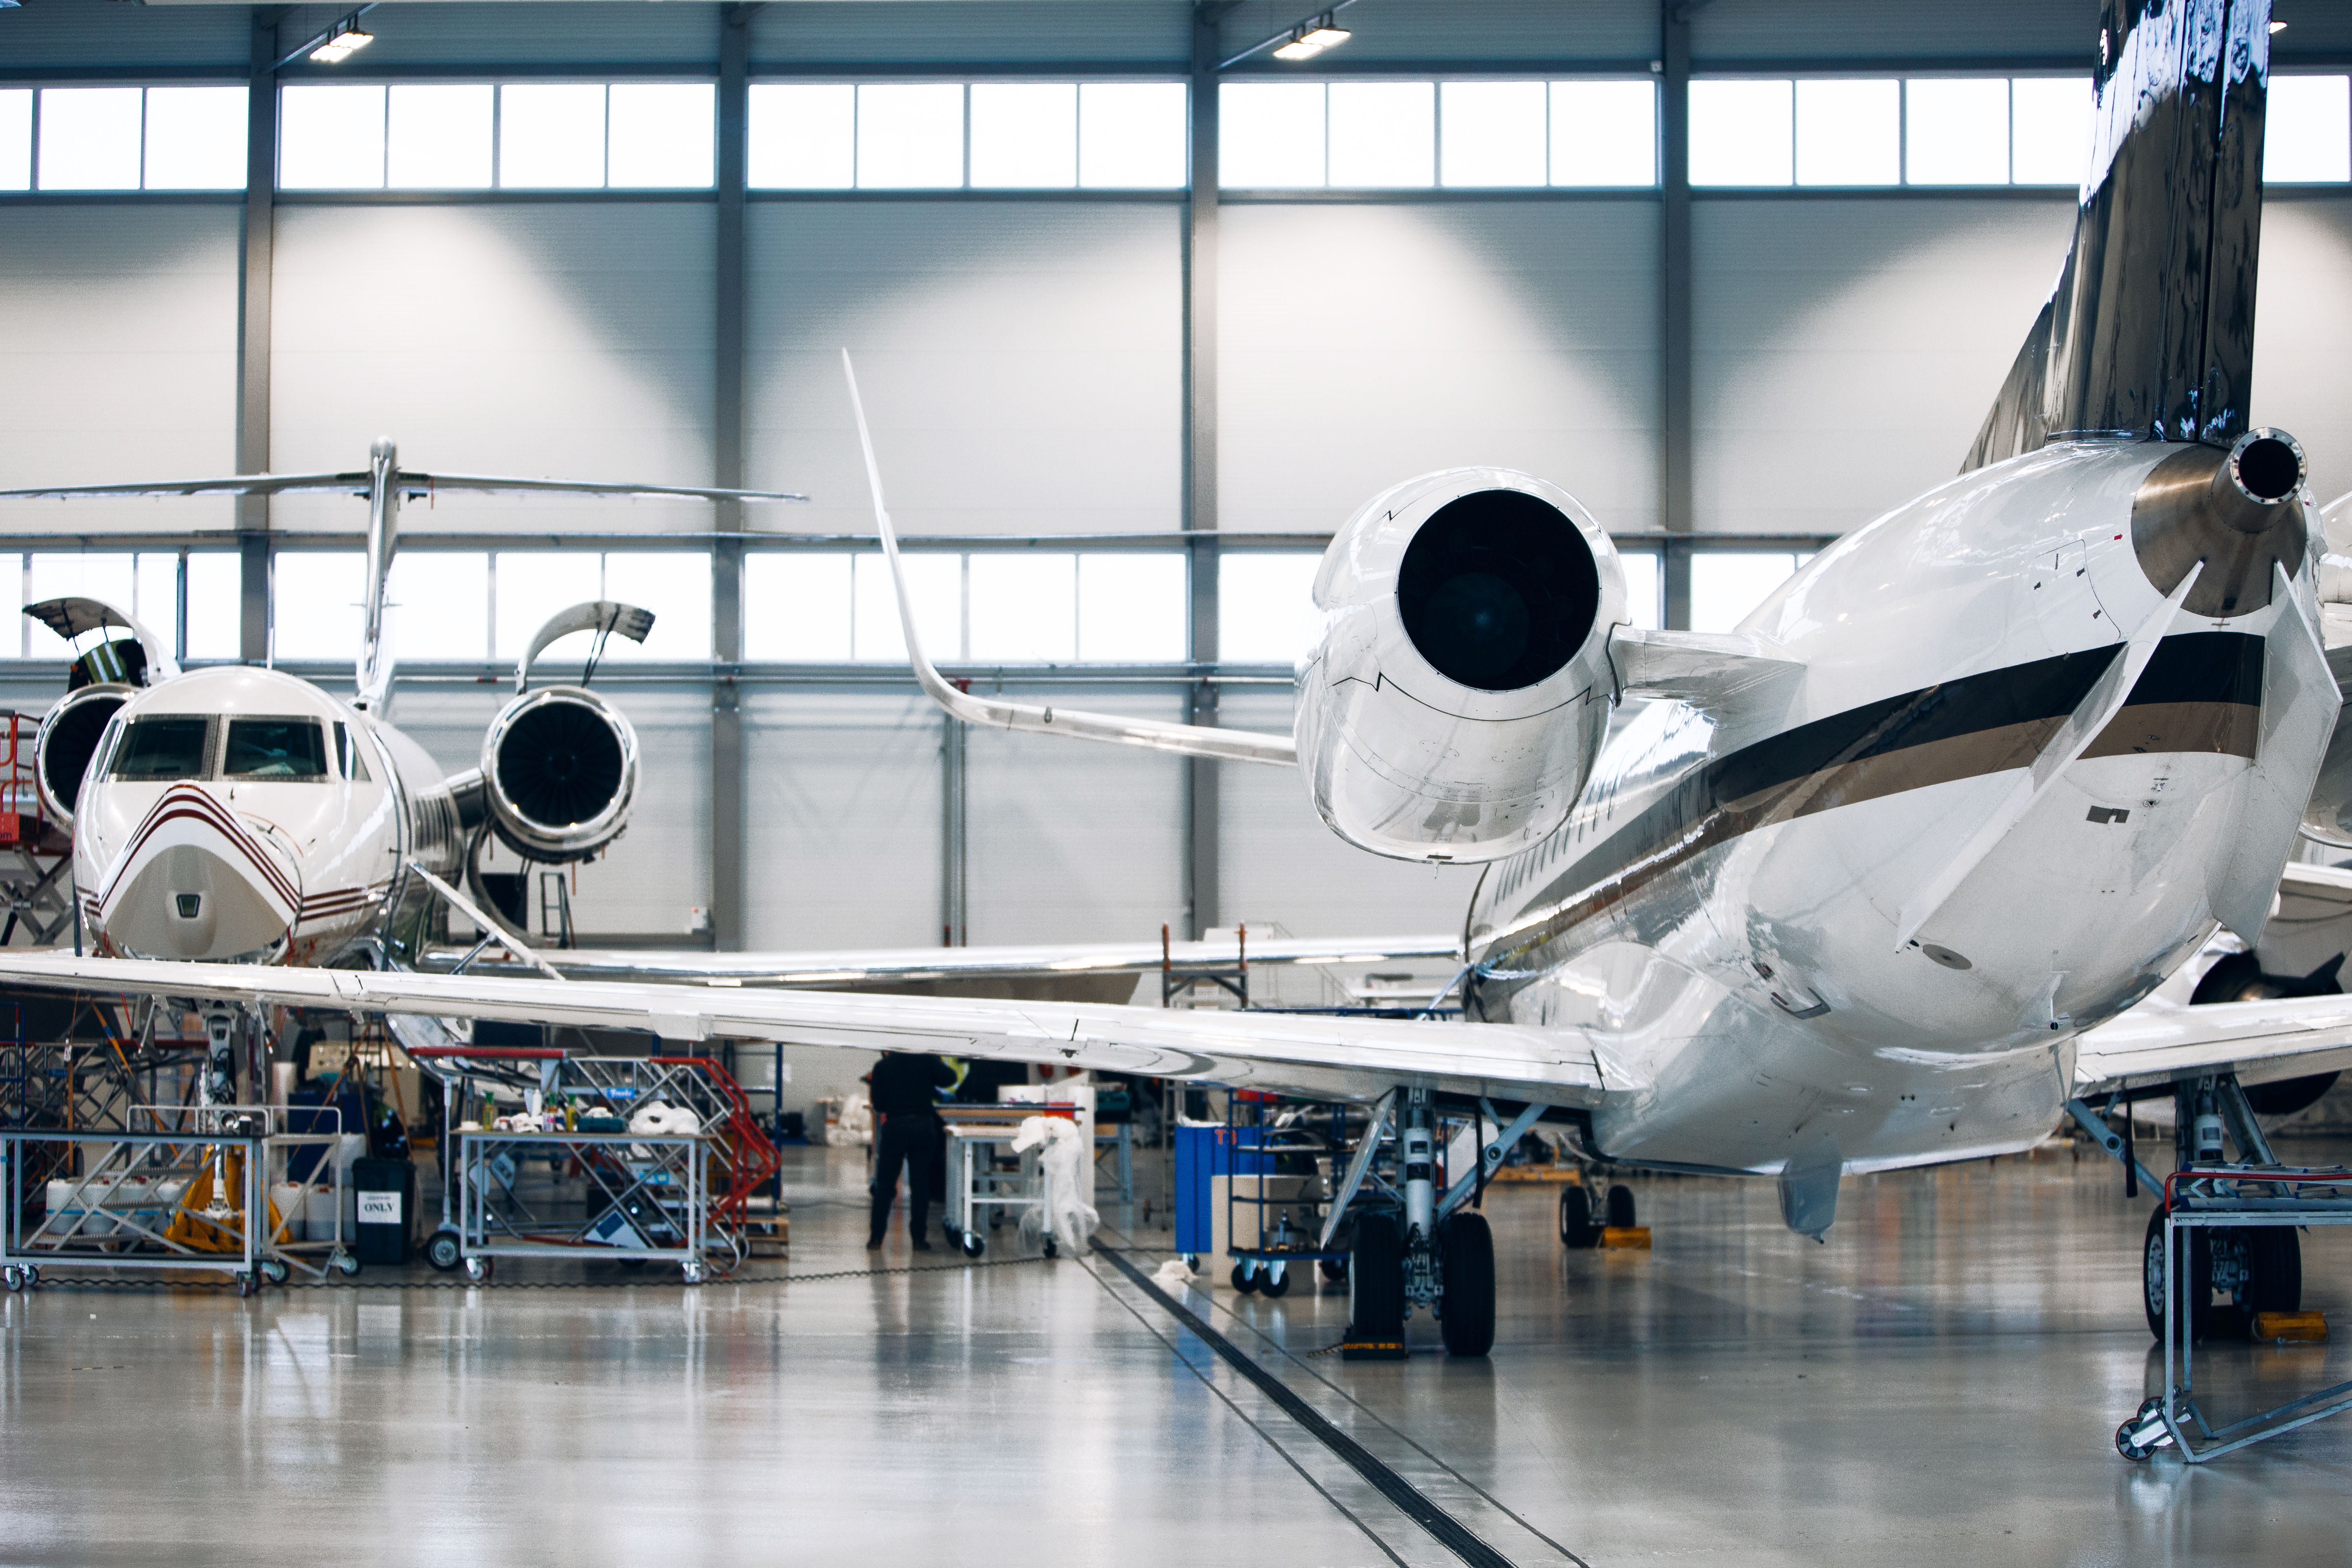 Engineers working on two private jets in large white hangar.